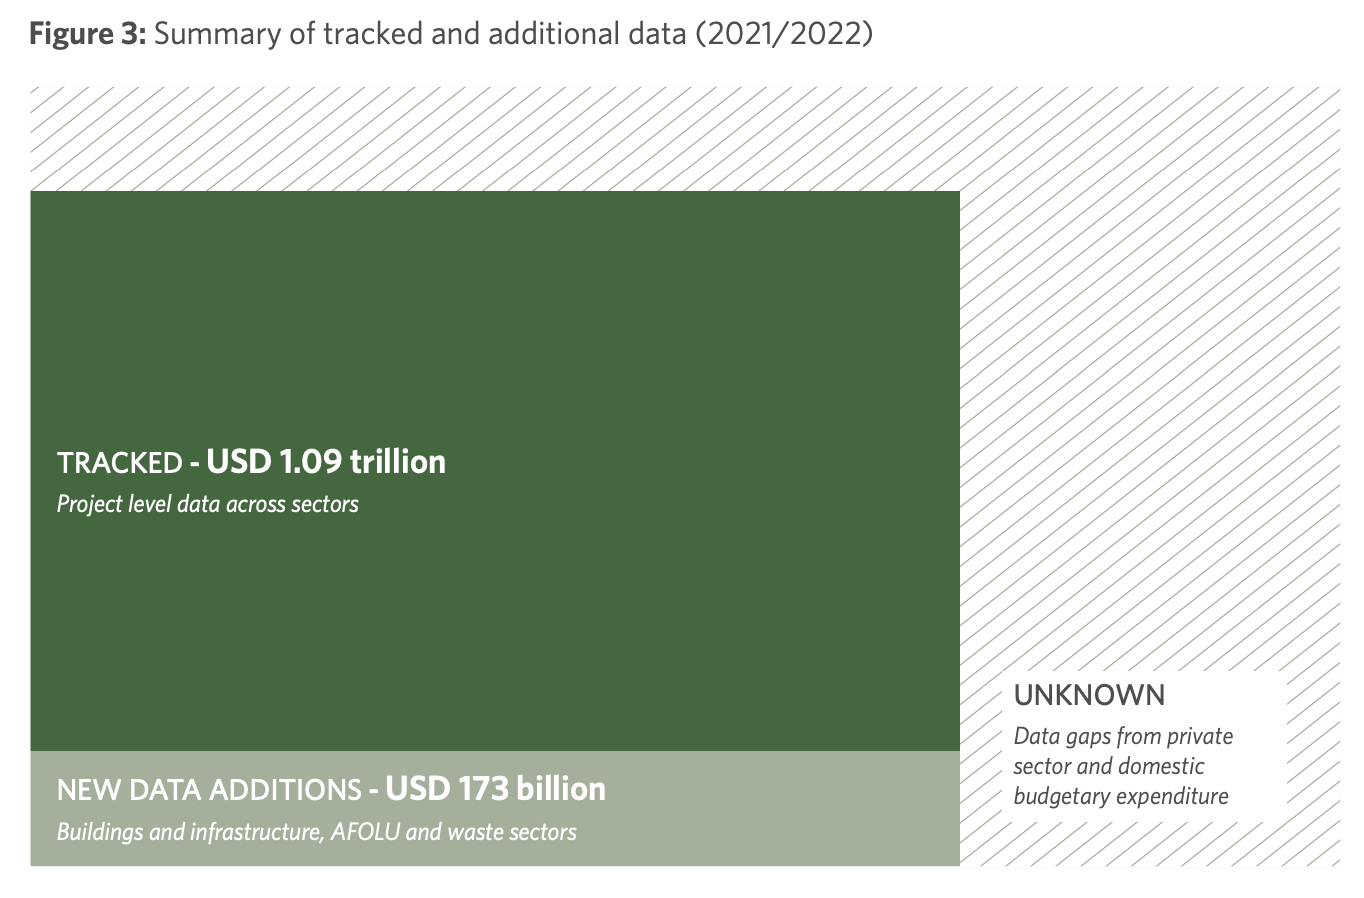 The methodological advancements in the 2023 Global Landscape of Climate Finance aim to address the gaps in climate finance data, yet limitations persist due to the opacity of traditional financial balance sheets. The necessity for clear, granular data is evident in order to fully comprehend the scope of climate finance and its impacts. Source: Graphic (https://www.climatepolicyinitiative.org/wp-content/uploads/2023/11/Global-Landscape-of-Climate-Finance-2023.pdf) by the Climate Policy Institute is licensed under a CC BY-NC-SA 4.0 License.